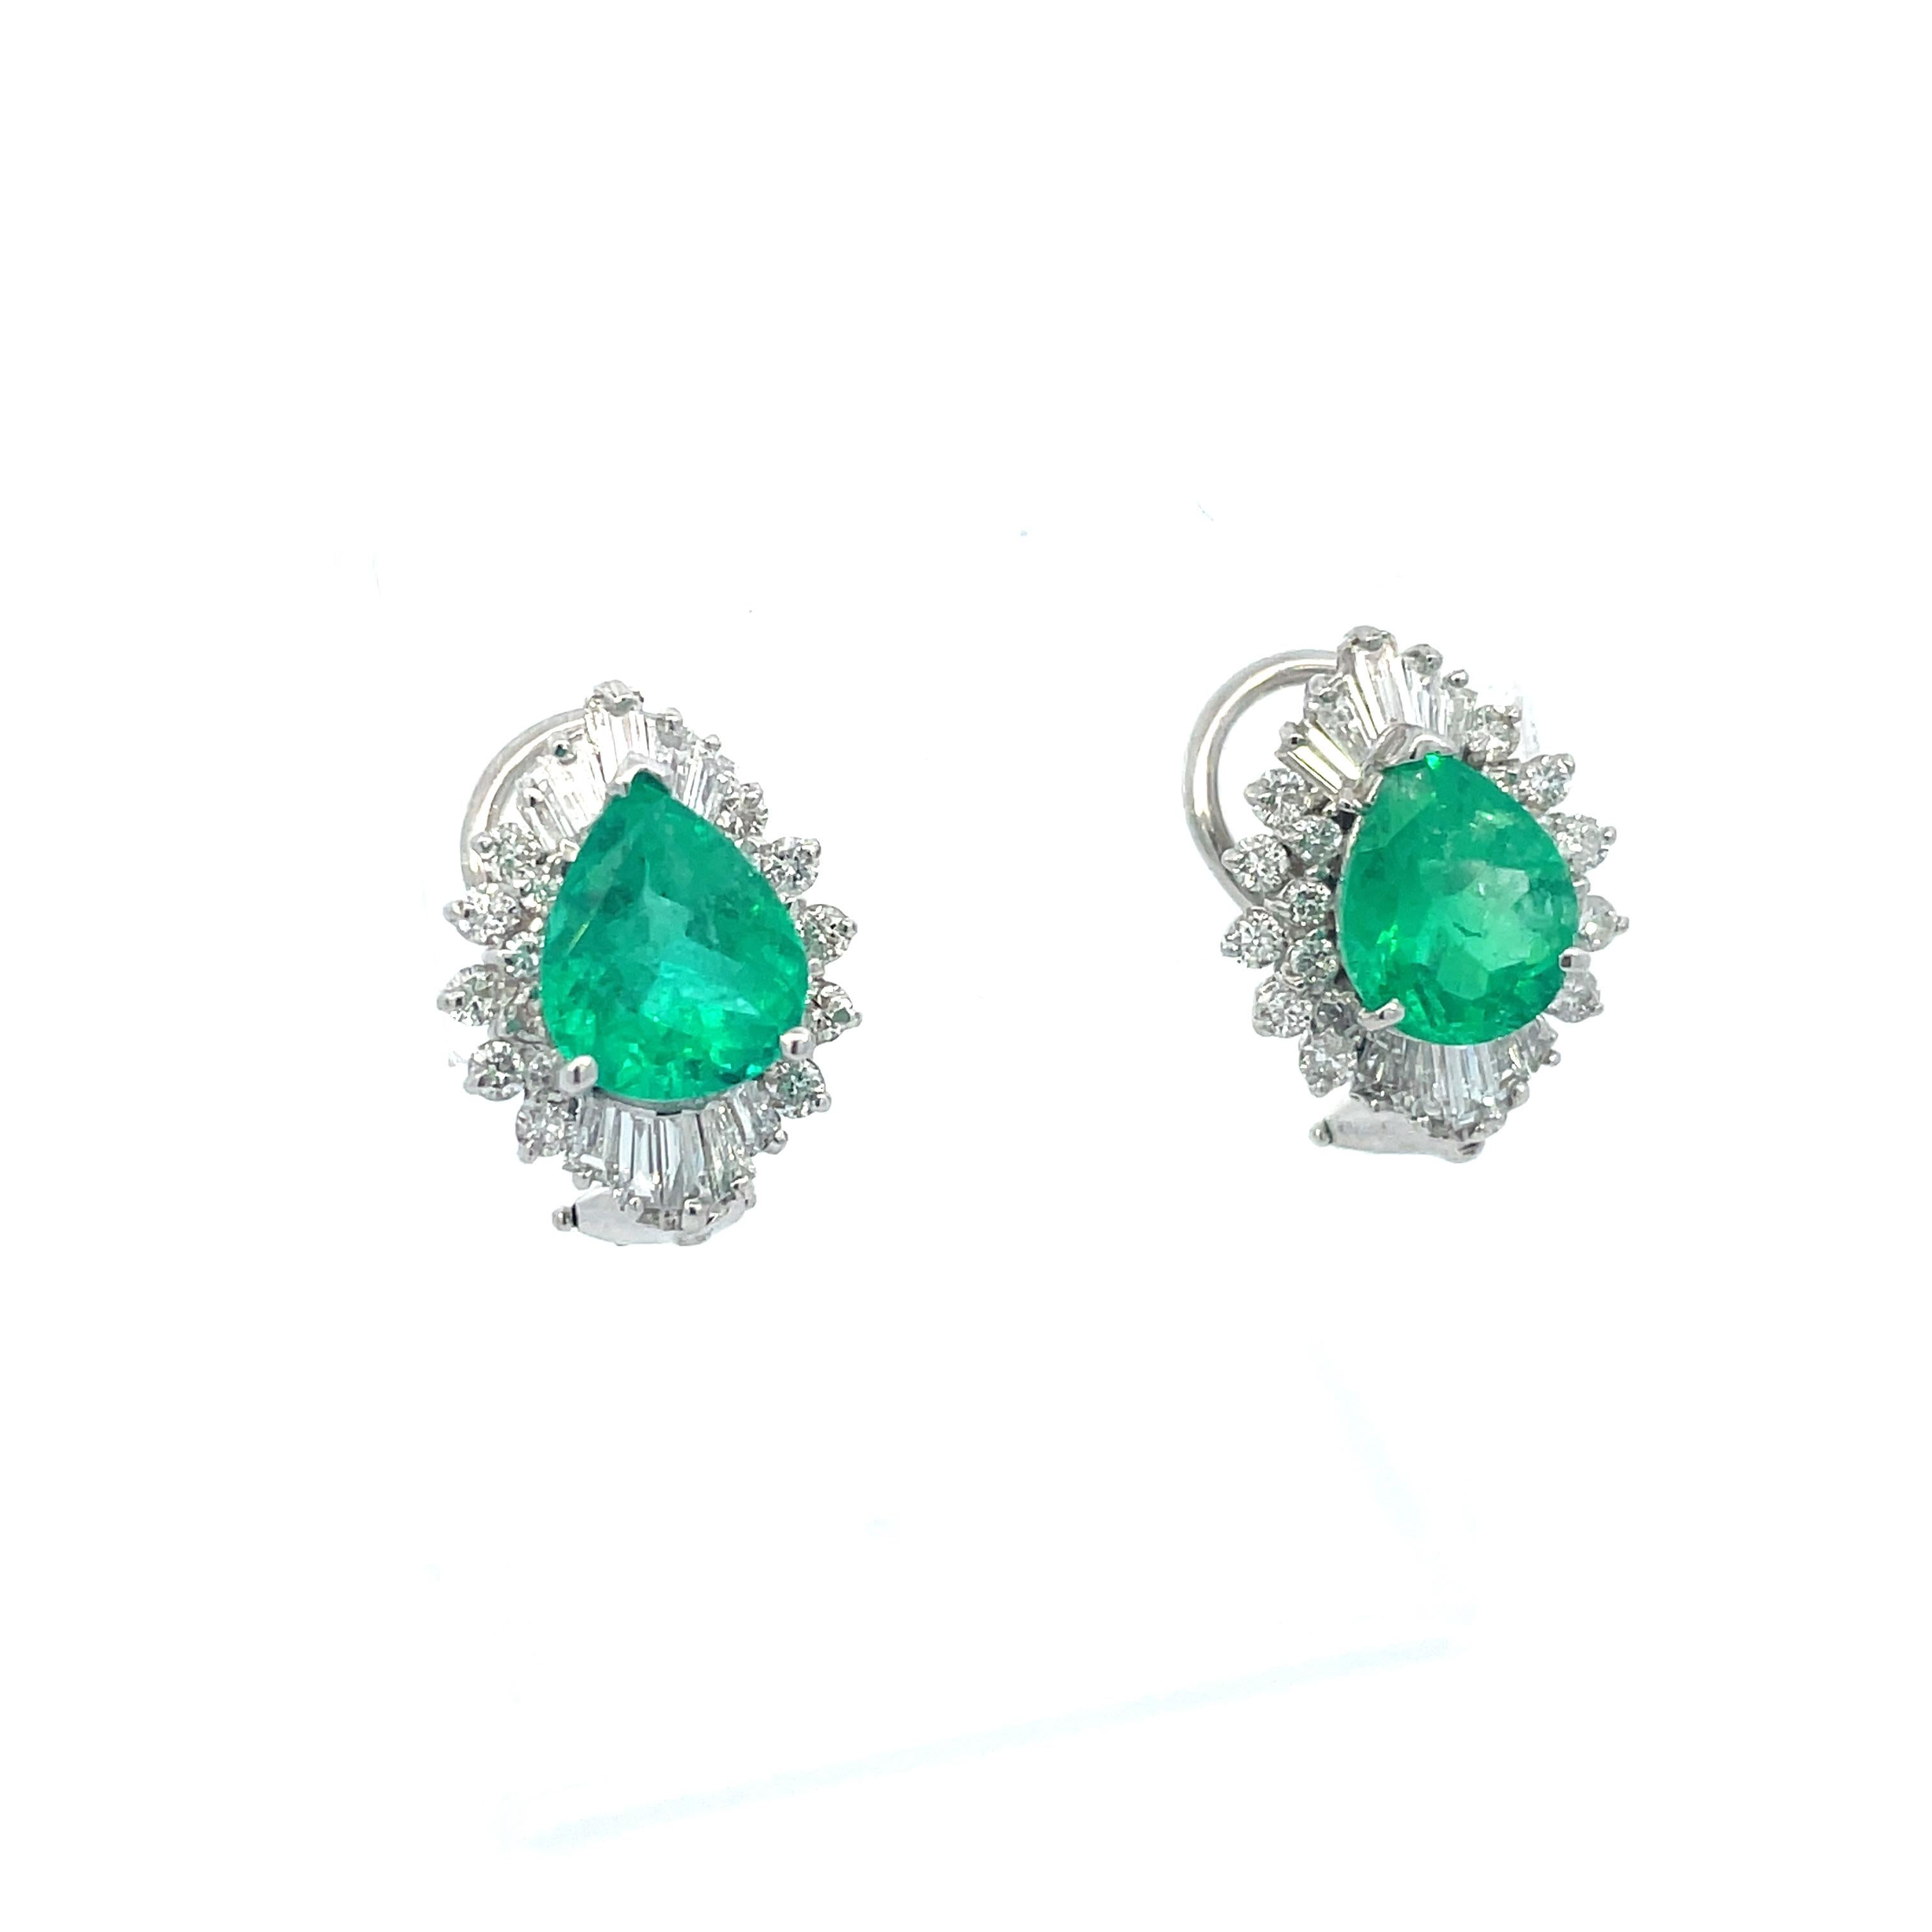 Contemporary 14K White Gold Pear Shaped Emerald and Diamond Earrings with AGL Report For Sale